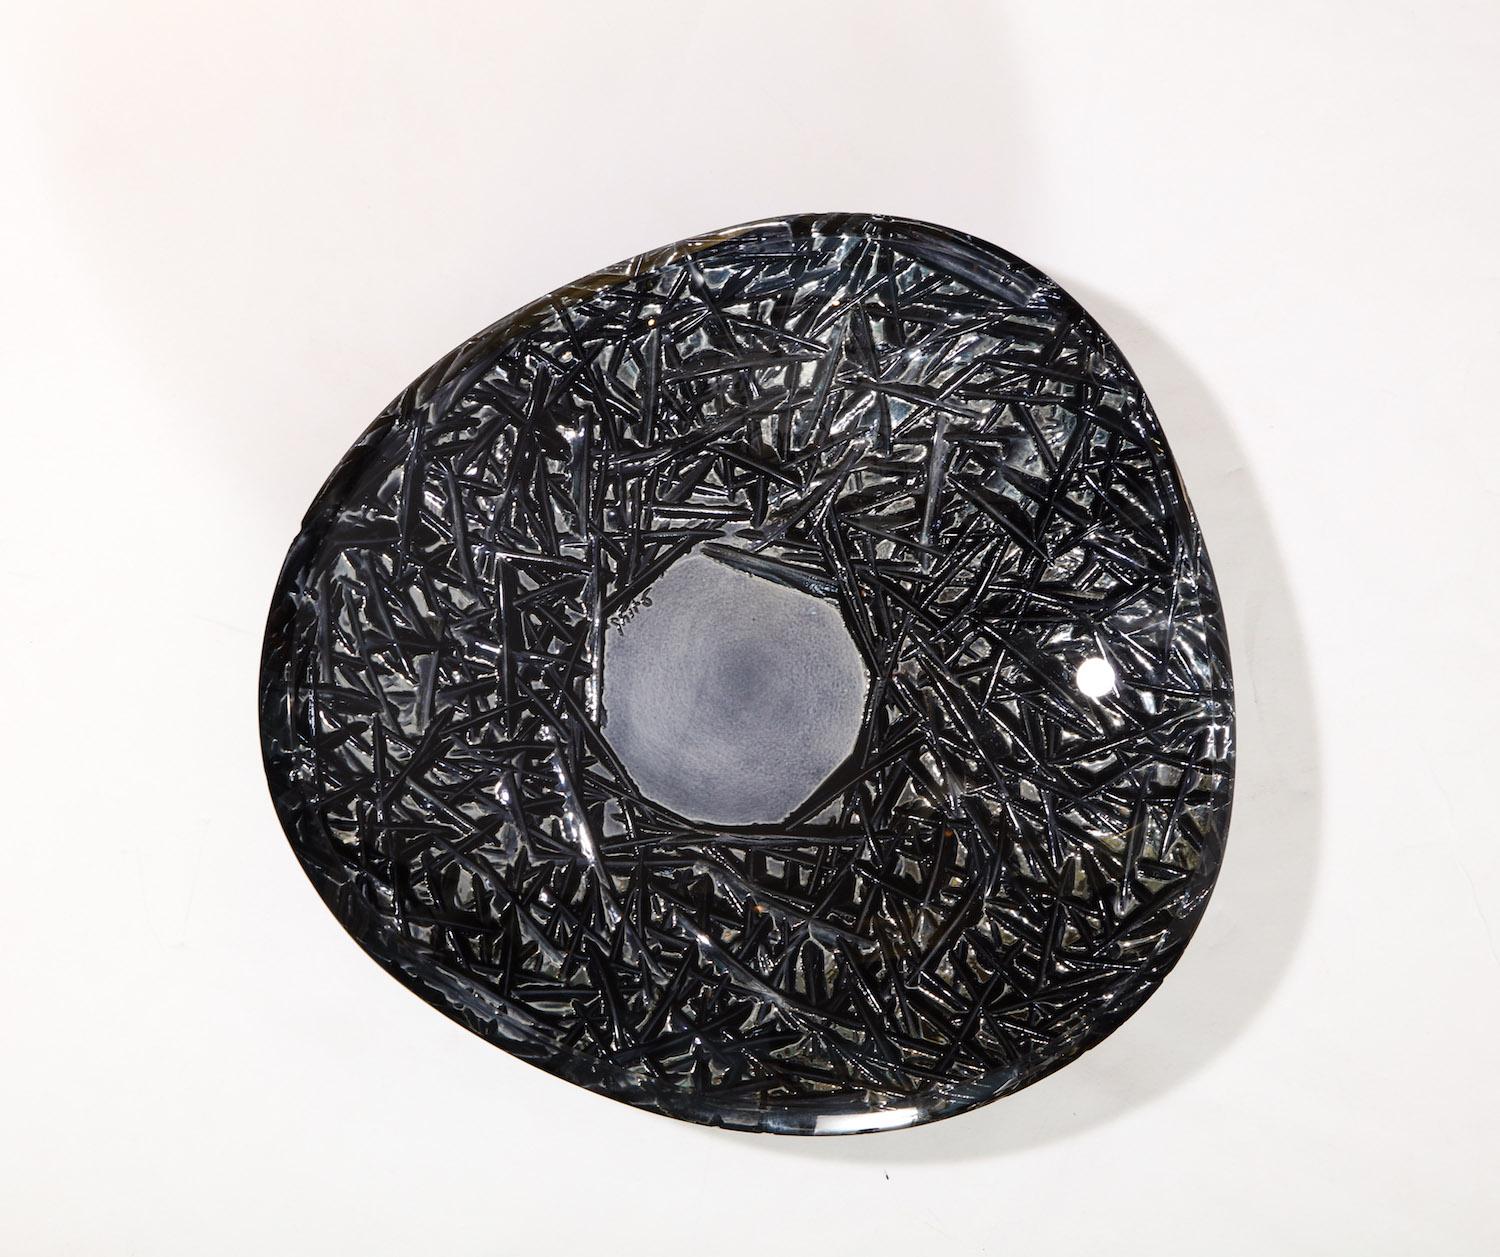 Studio-Made Carved Glass Dish by Ghiró Studio, Large In Excellent Condition For Sale In New York, NY